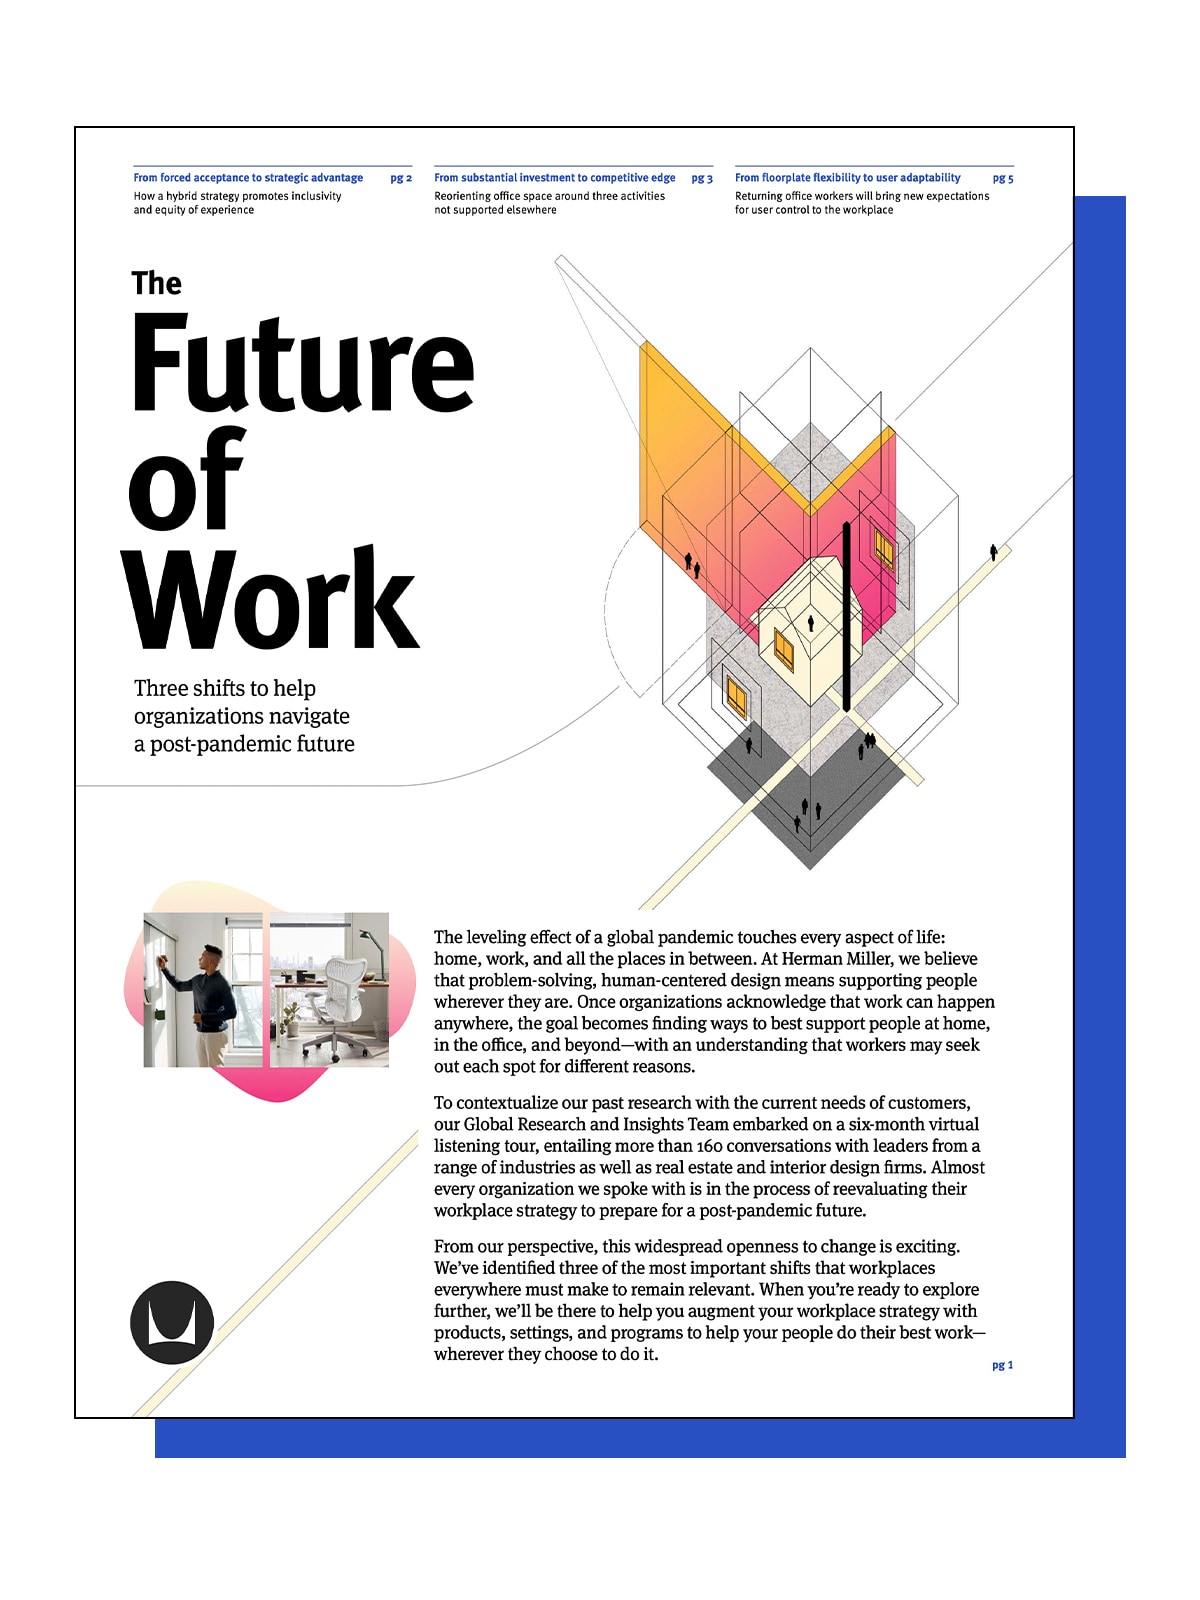 Cover image of the PDF download of the Future of Work: Looking Forward report.